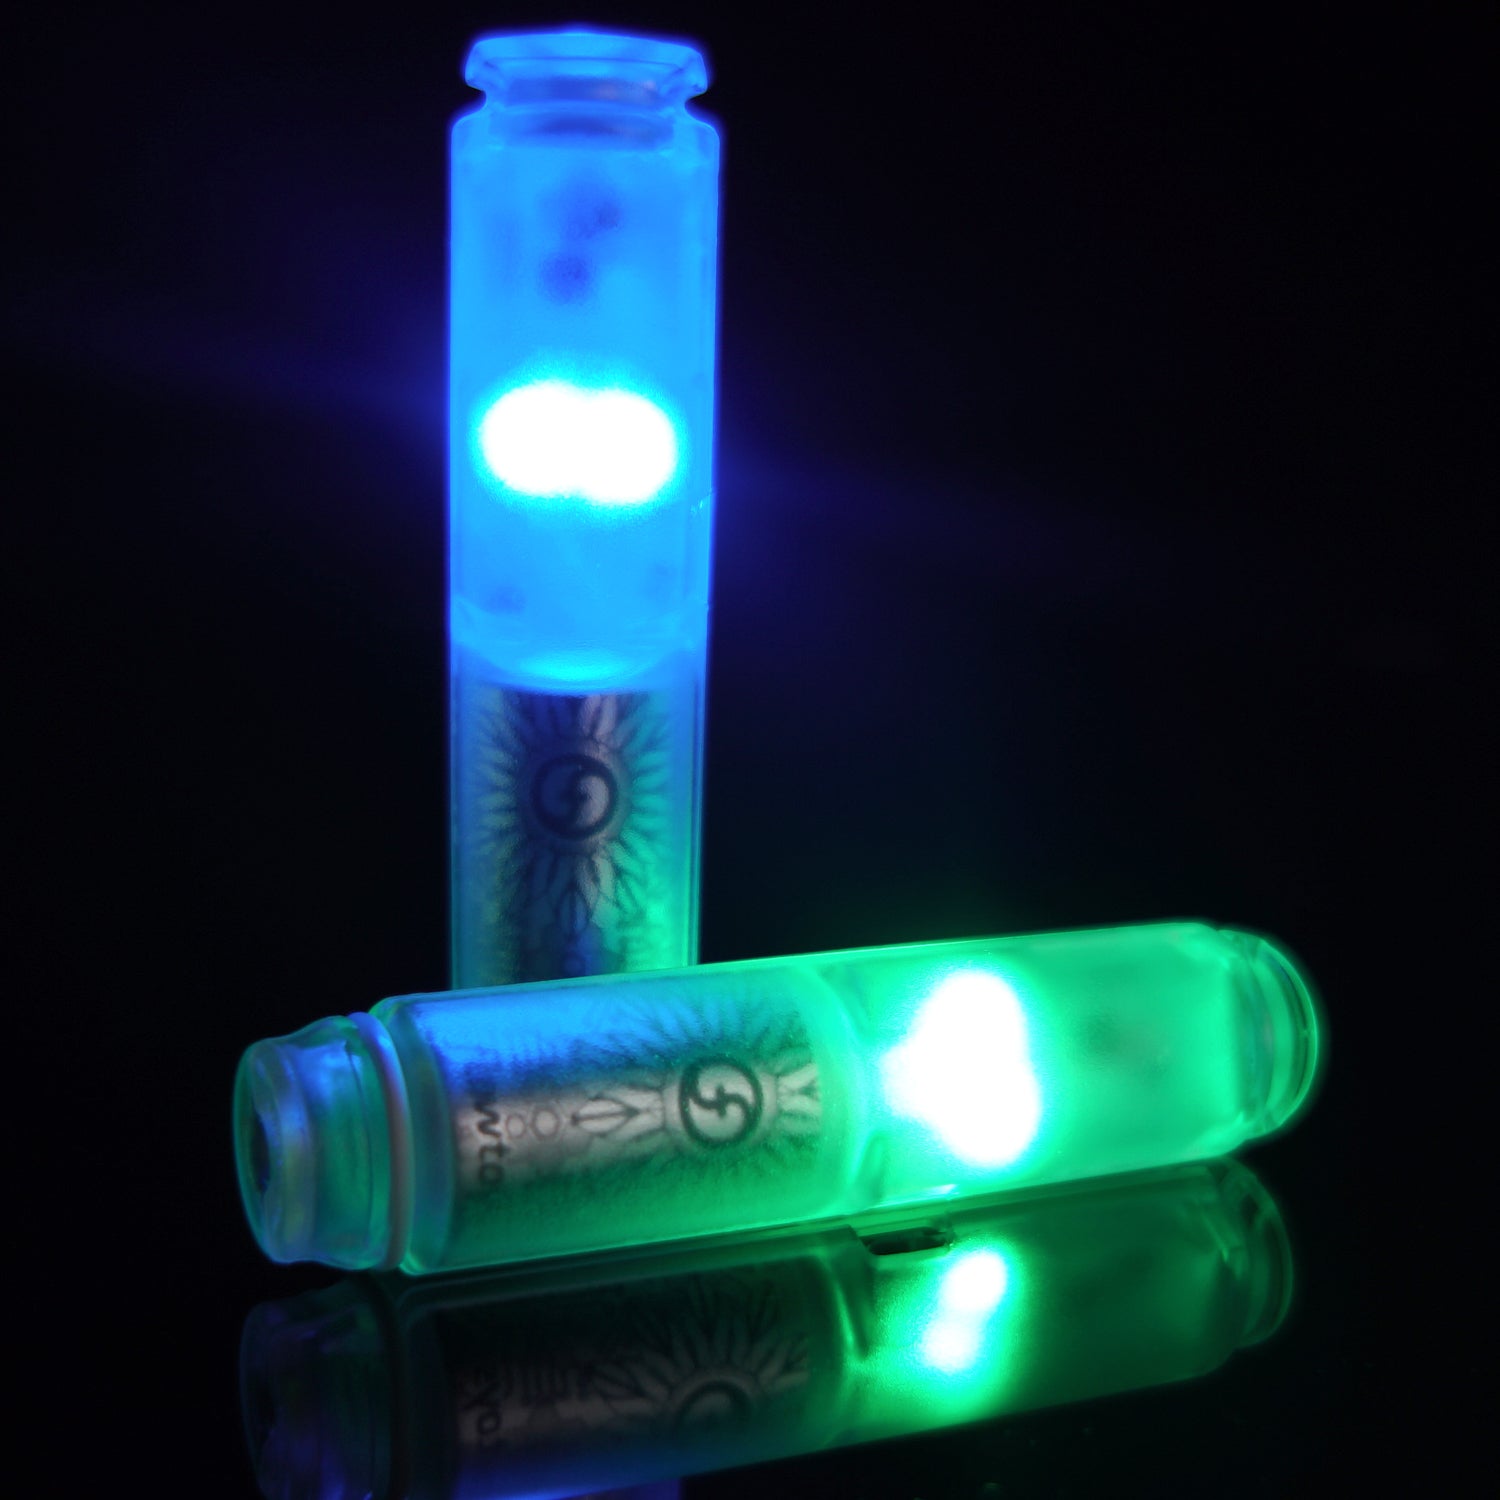 Two capsules lit up with dark background